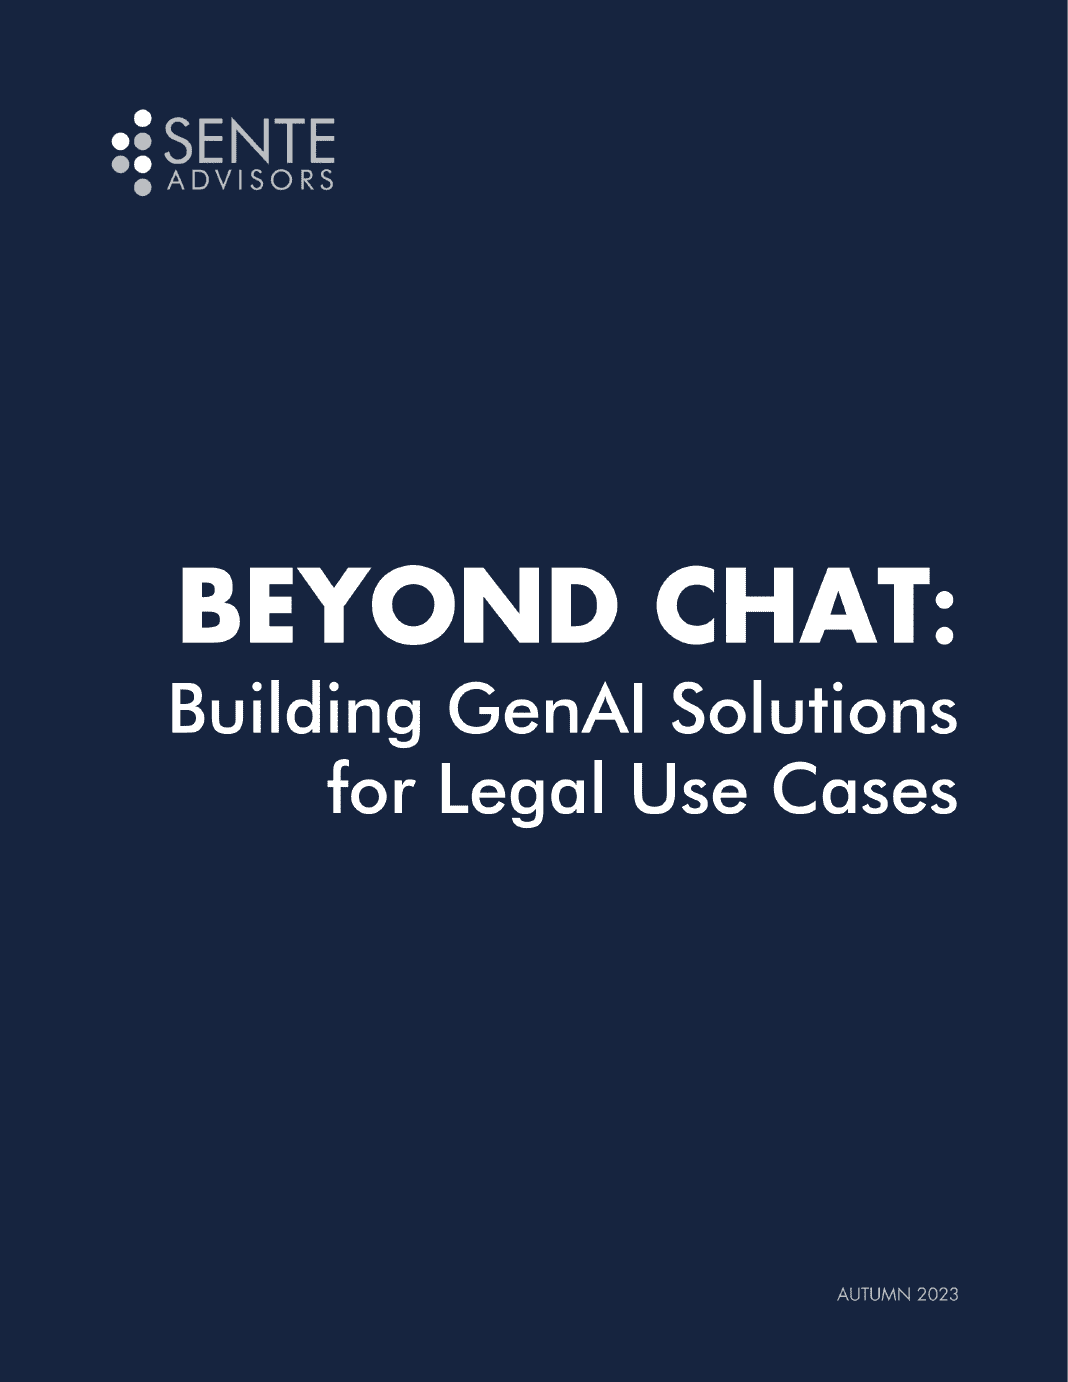 Sente Advisors - Beyond Chat Building Solutions Guide